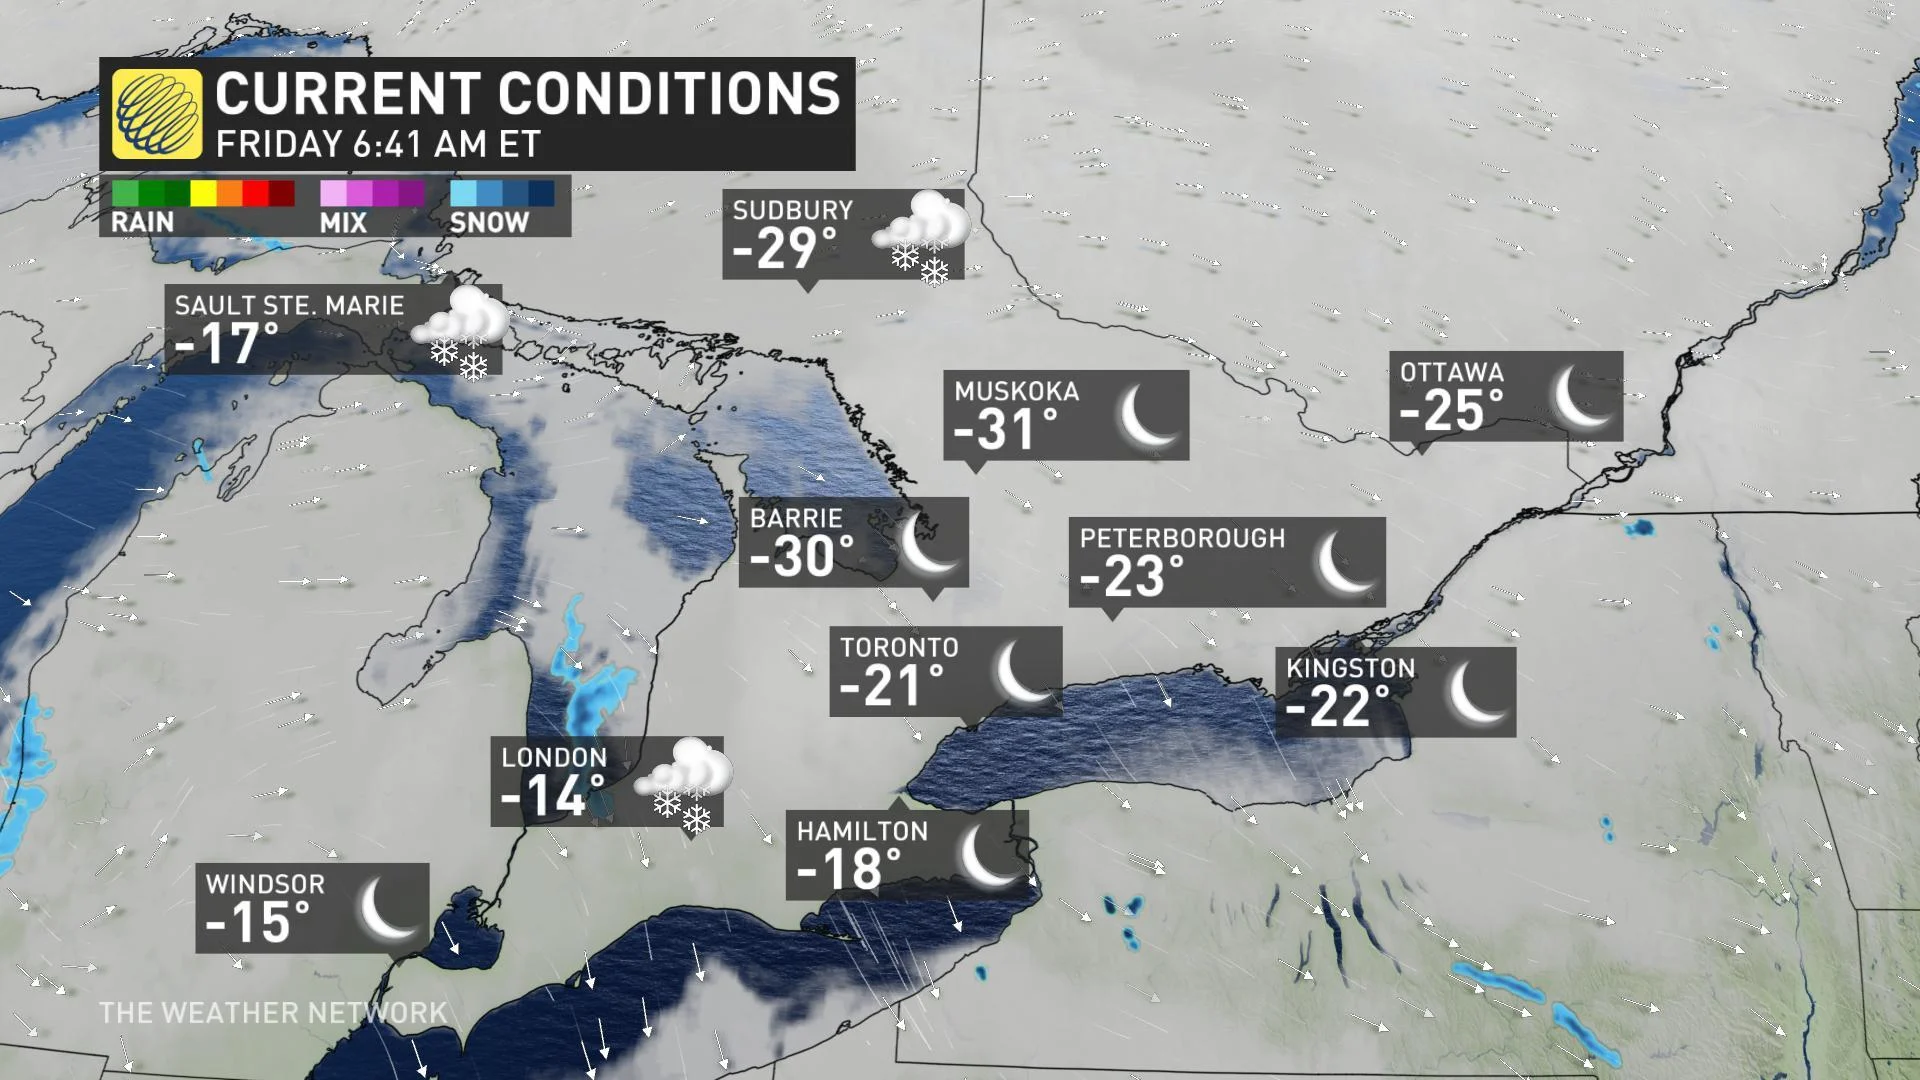 Conditions OntarioSouth1 Current